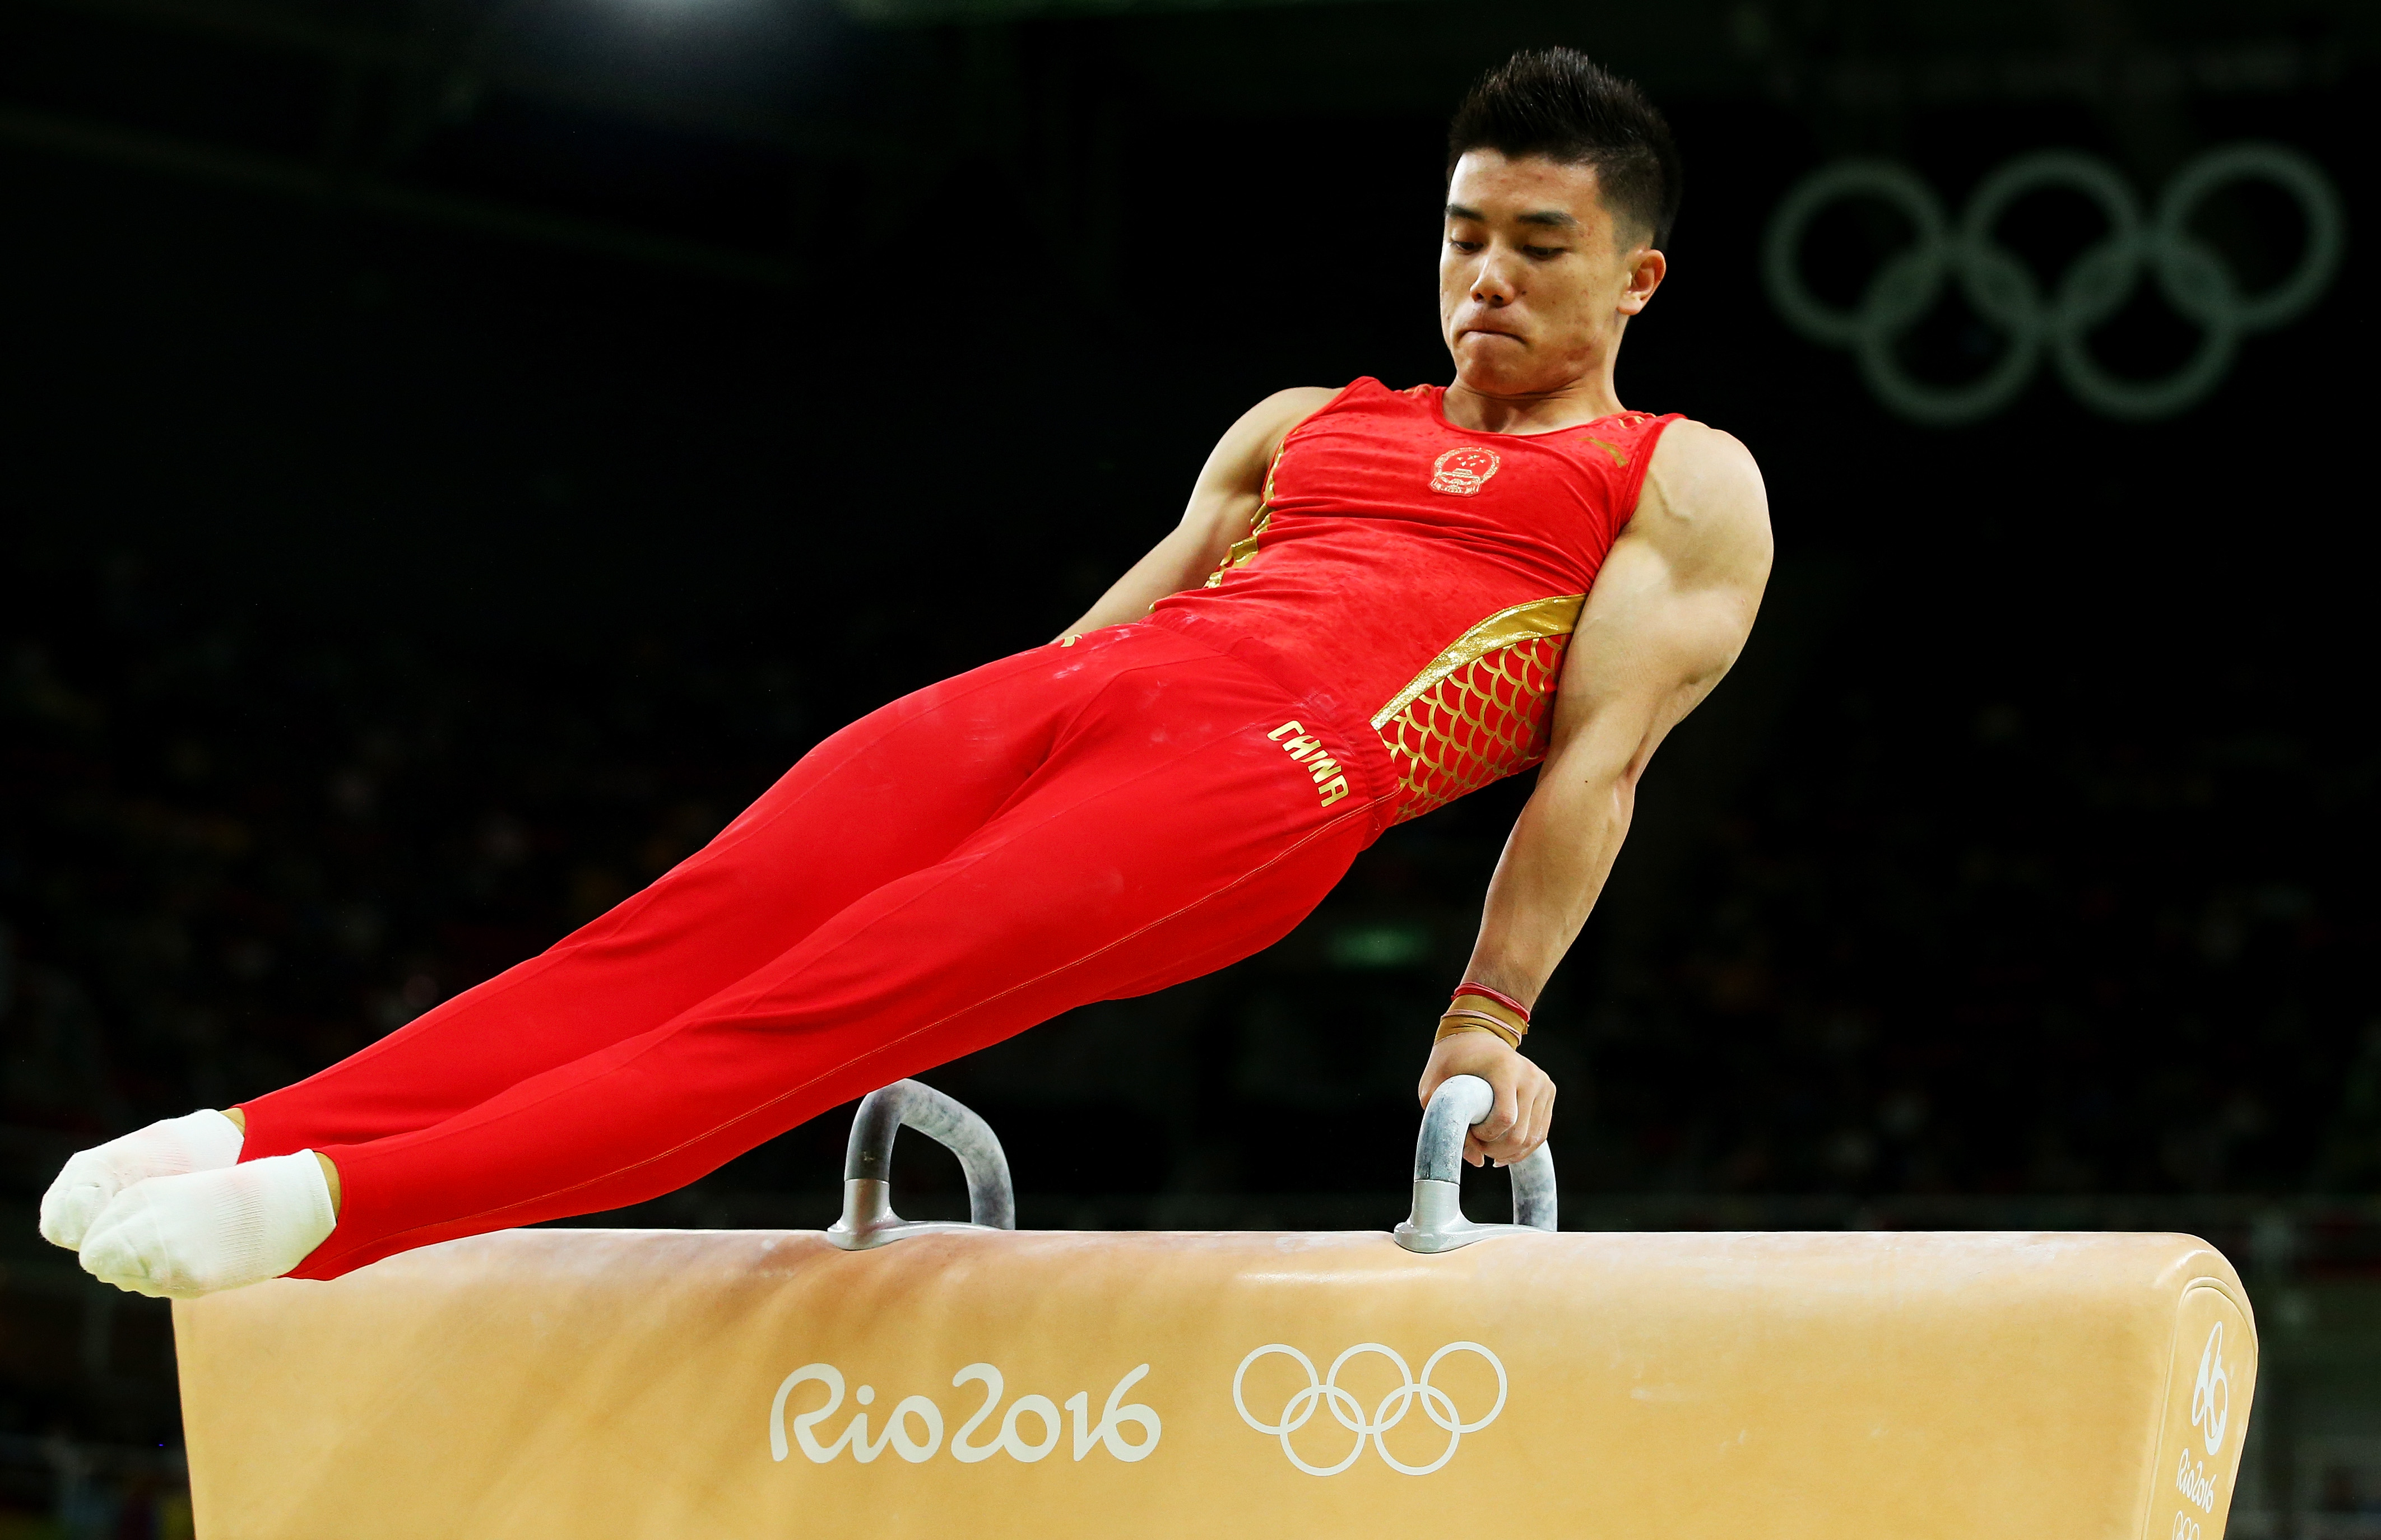 Why Are Men S Women S Gymnastics Events Different Look To The Skills They Emphasize